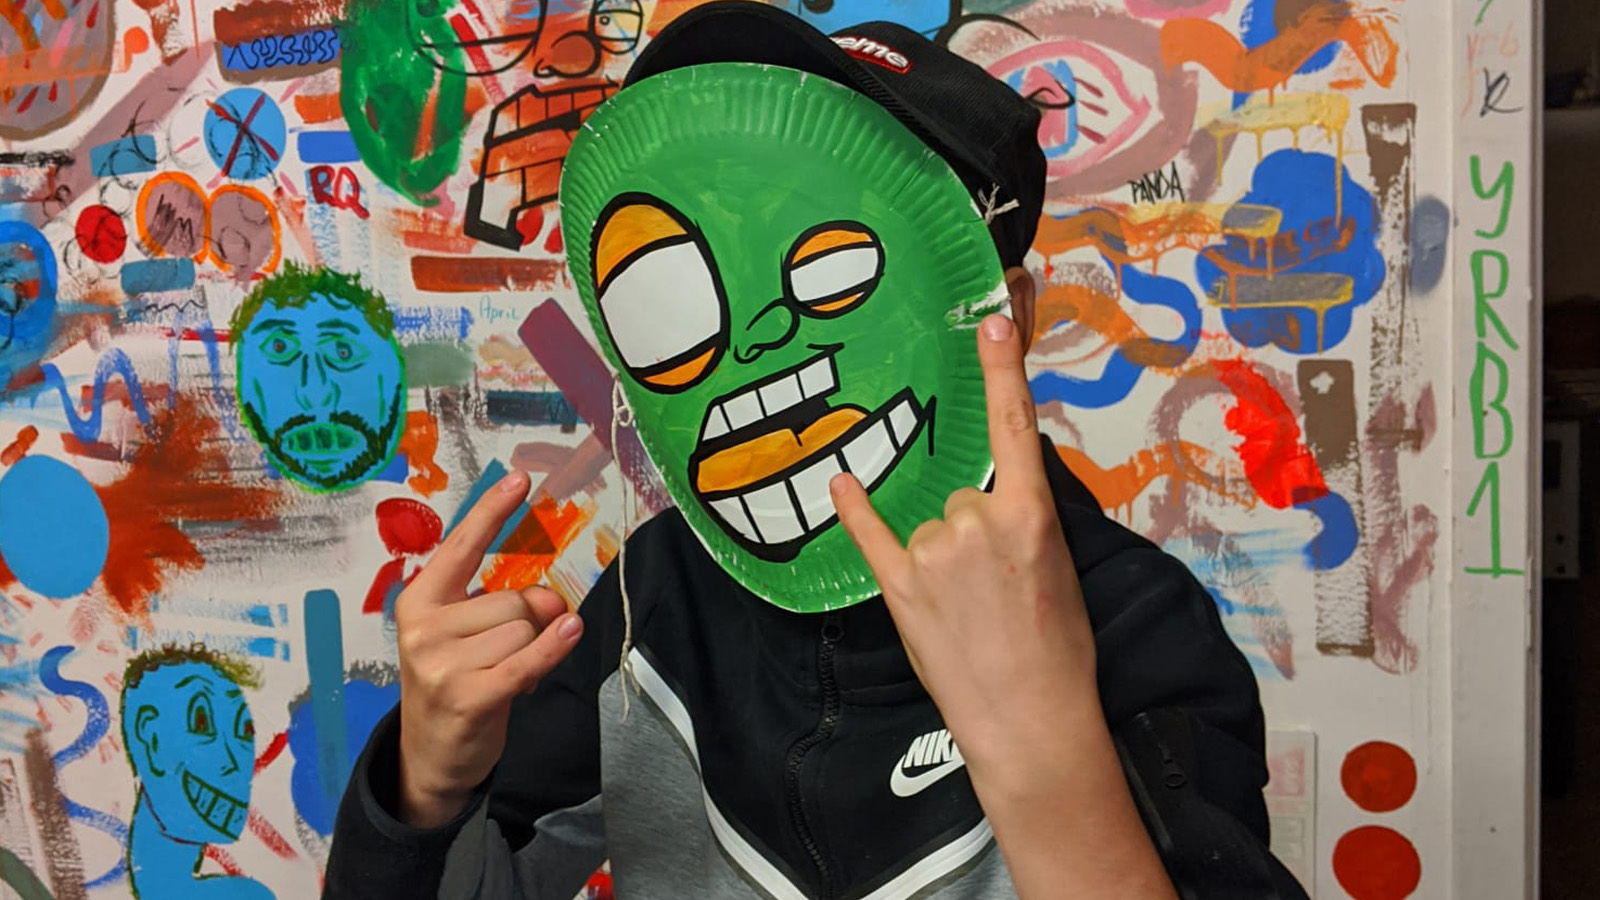 A young man wearing a green mask with a cartoon face on it makes the devil horns hand sign at the camera Behind him is a white wall covered in colourful and playful drawings, illustrations and markings. It’s a visual cacophony